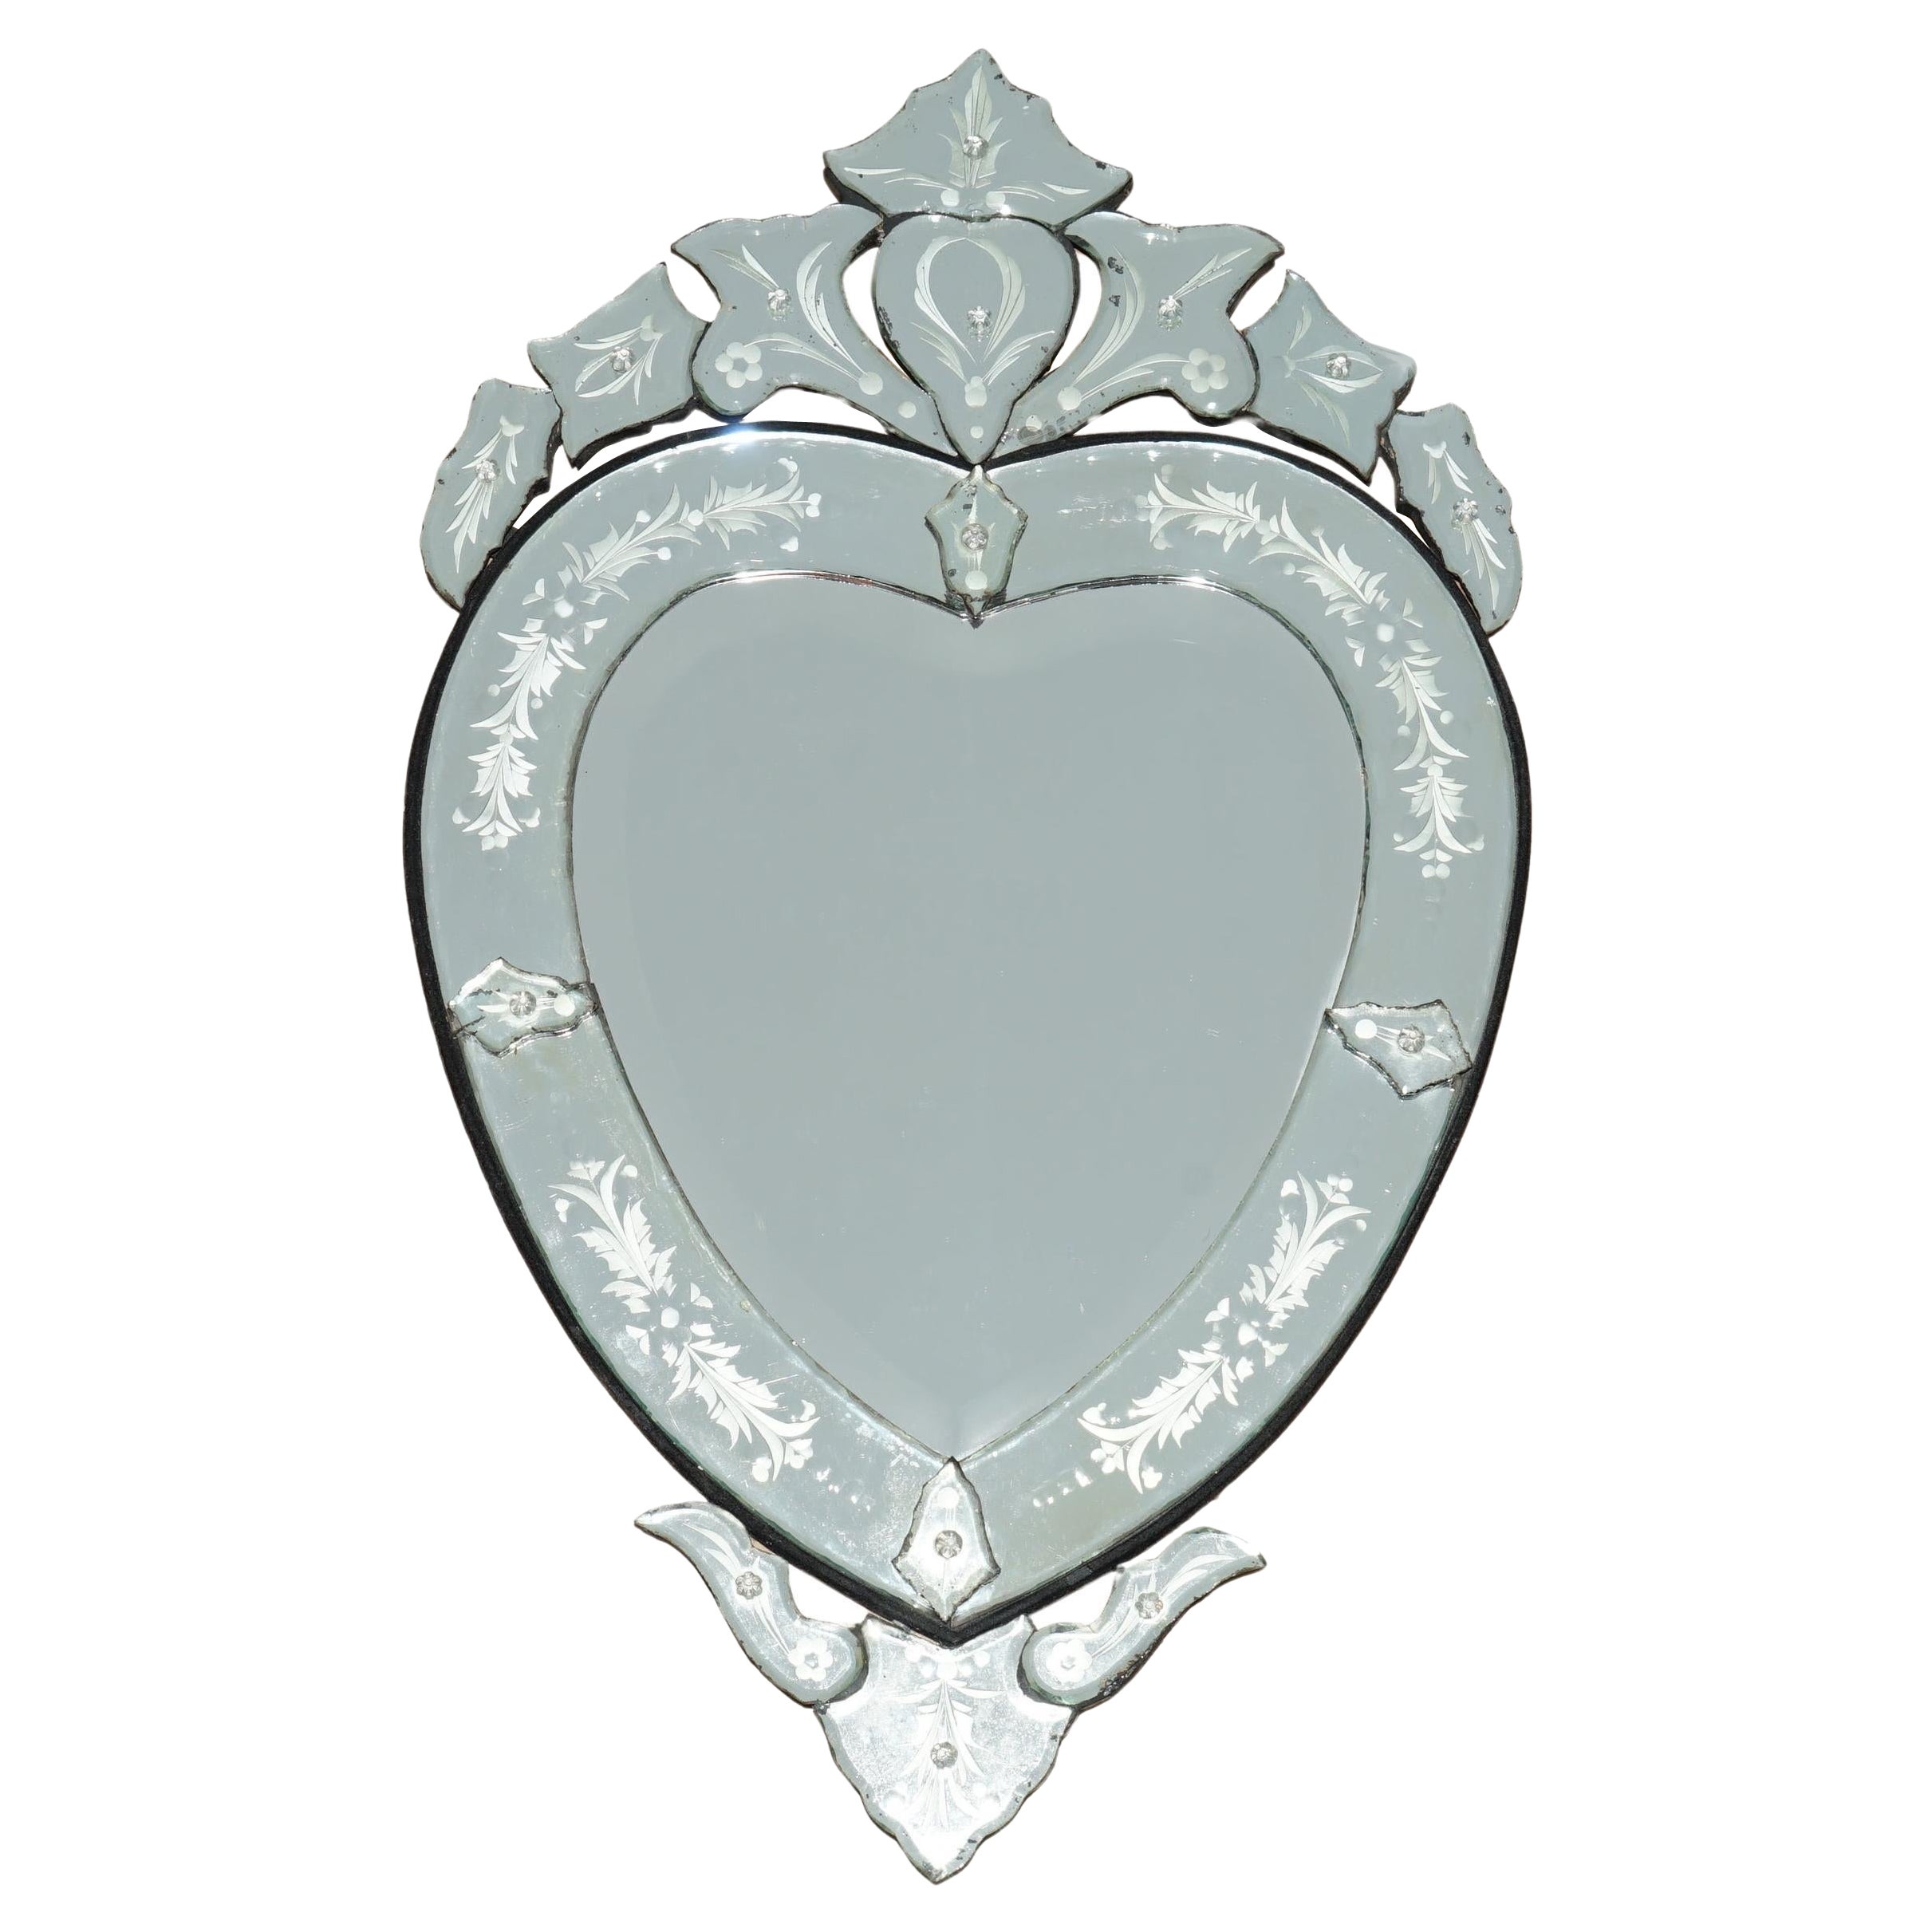 STUNNING ANTIQUE CIRCA 1910 VENETIAN ETCHED GLASS HEART SHAPED WALL MiRROR For Sale